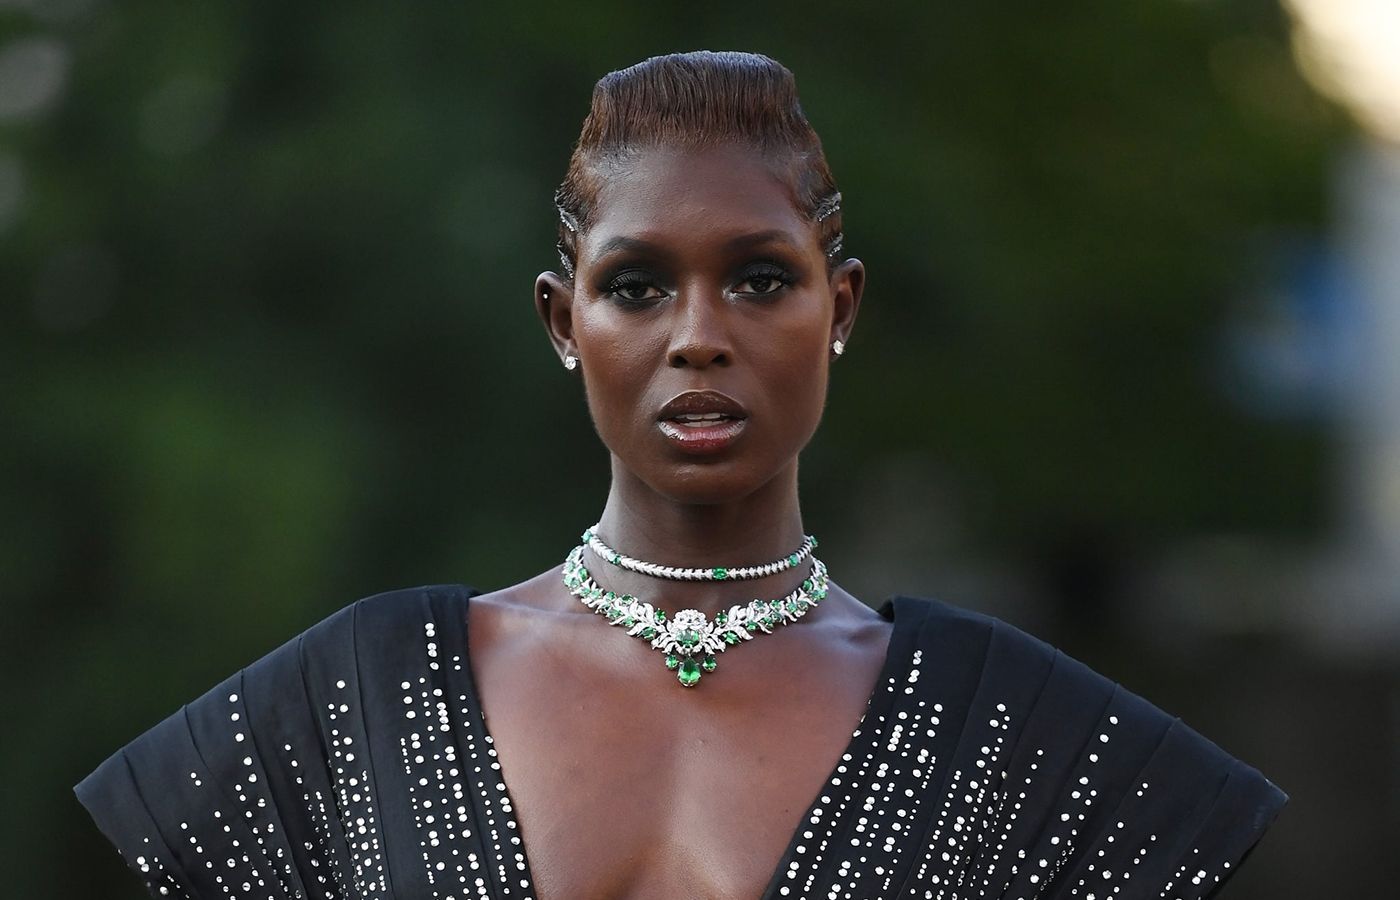 Jodie Turner-Smith at the White Noise premier at the Venice Film Festival wearing a Gucci High Jewellery necklace in white gold, tsavorites, and diamonds from the Hortus Deliciarum High Jewellery collection